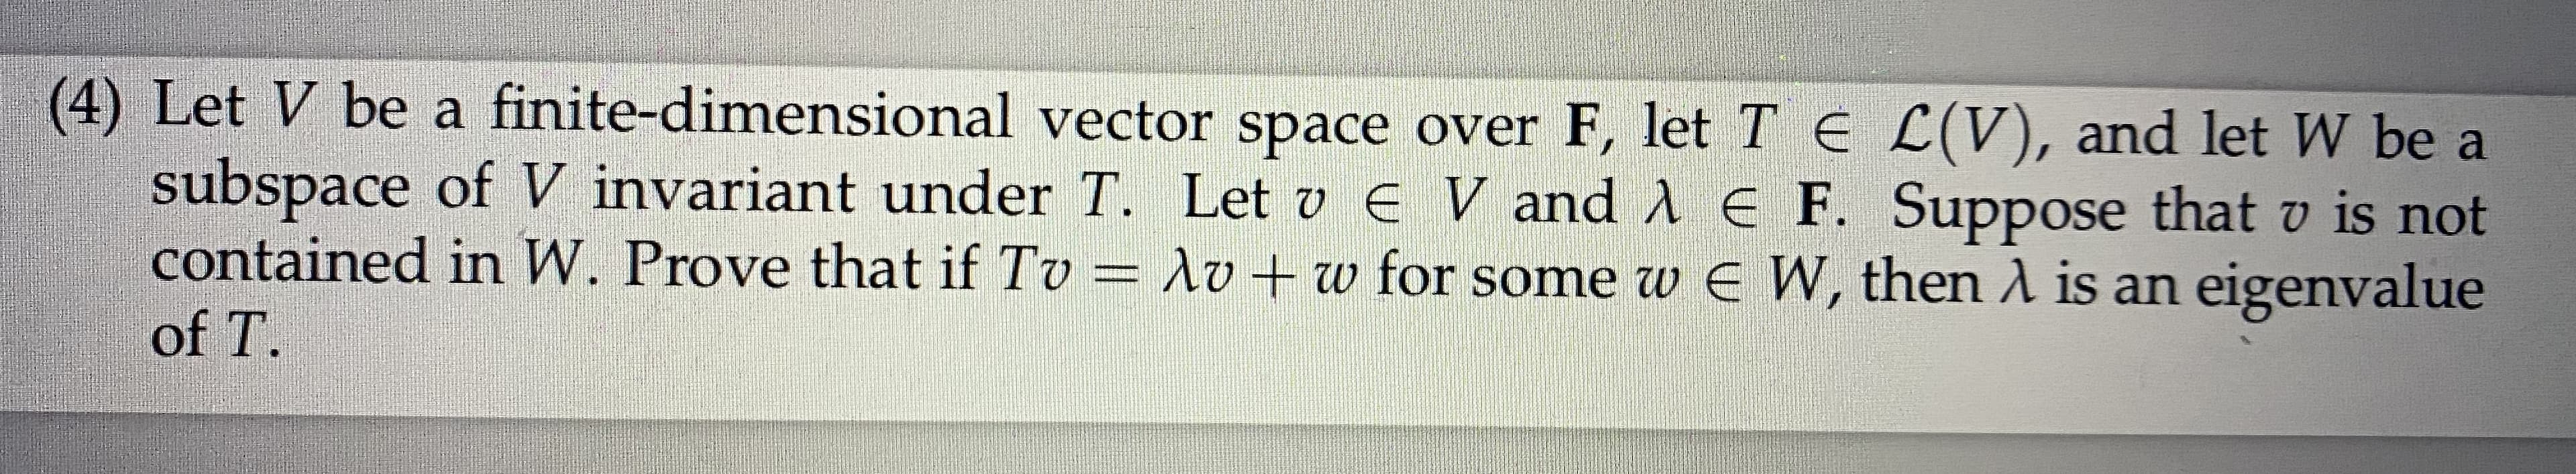 (4) Let V be a finite-dimensional vector space over F, let T E L(V), and let W be a
subspace of V invariant under T. Let v E V and A E F. Suppose that v is not
contained in W. Prove that if Tv = lo + w for some w E W, then A is an eigenvalue
of T.
